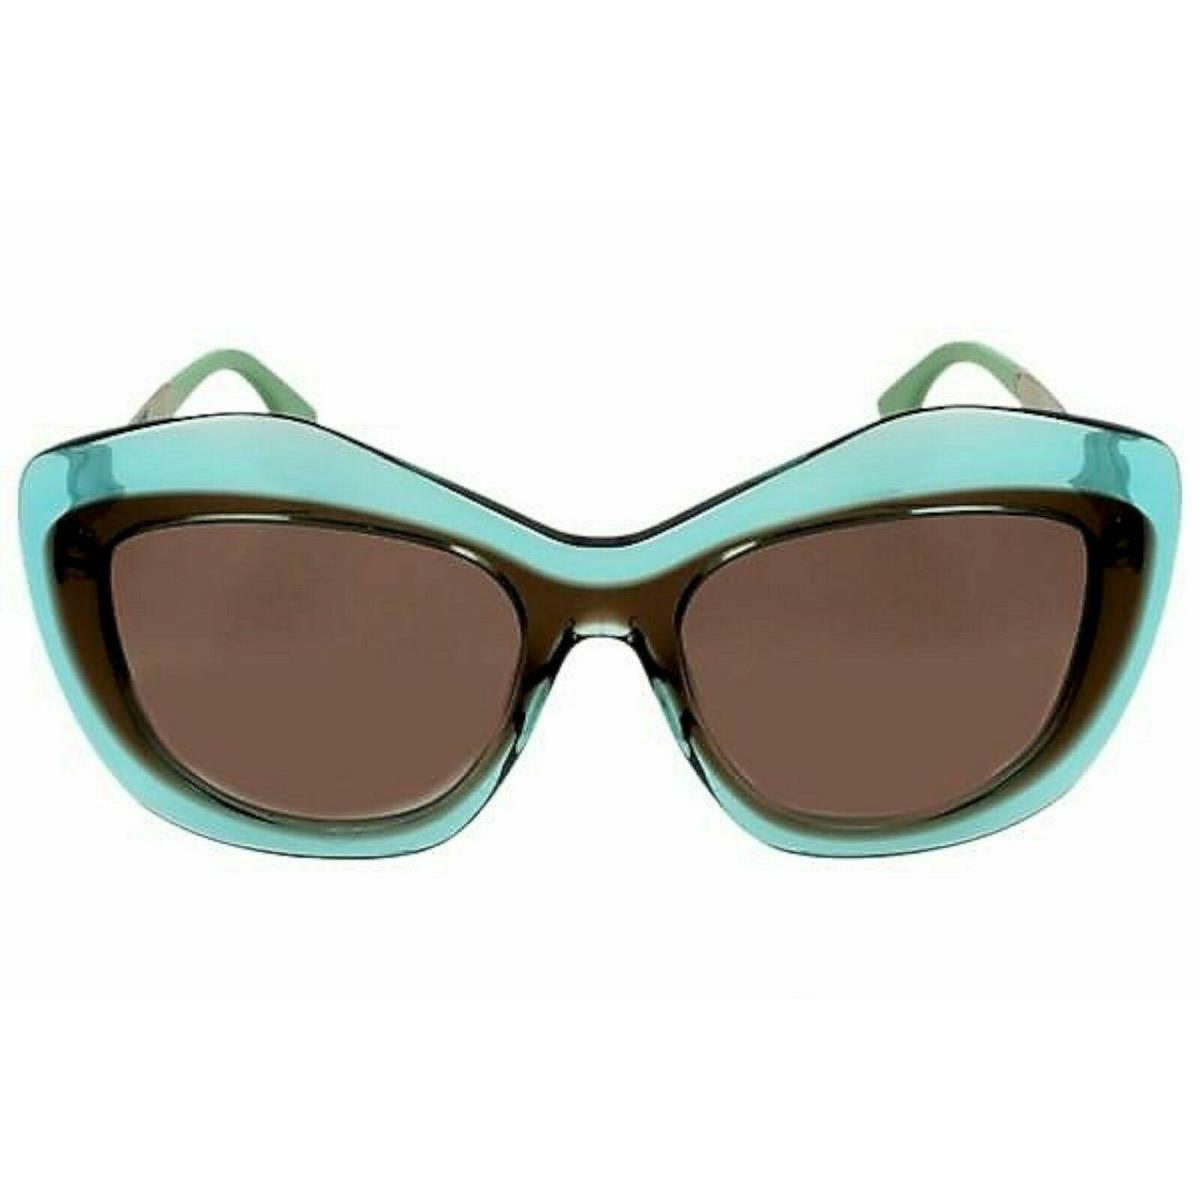 Fendi FF0029/S7NUNE Womens Blue Brown Oversized Butterfly Sunglasses - Frame: Transparent Blue & Brown, Lens: Brown Gradient, Temple: Silver & Green